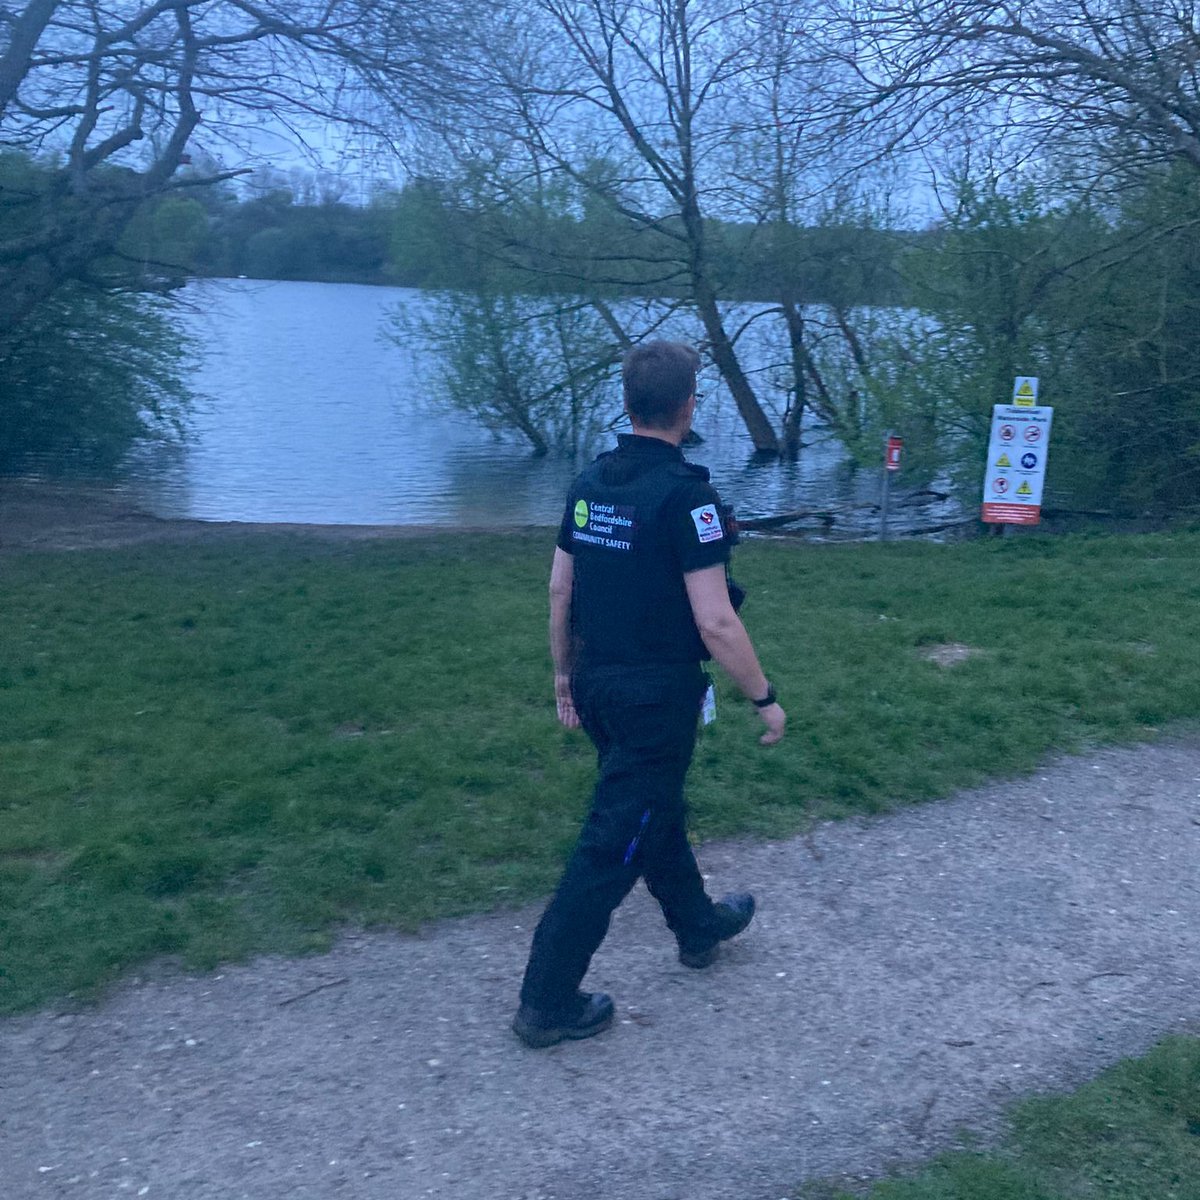 Last week during an evening patrol, two of our Safer Neighbourhood Officers confiscated a bottle of alcohol from youths in Leighton Buzzard & helped a parent find a missing child @letstalkcentral @LLTCNews